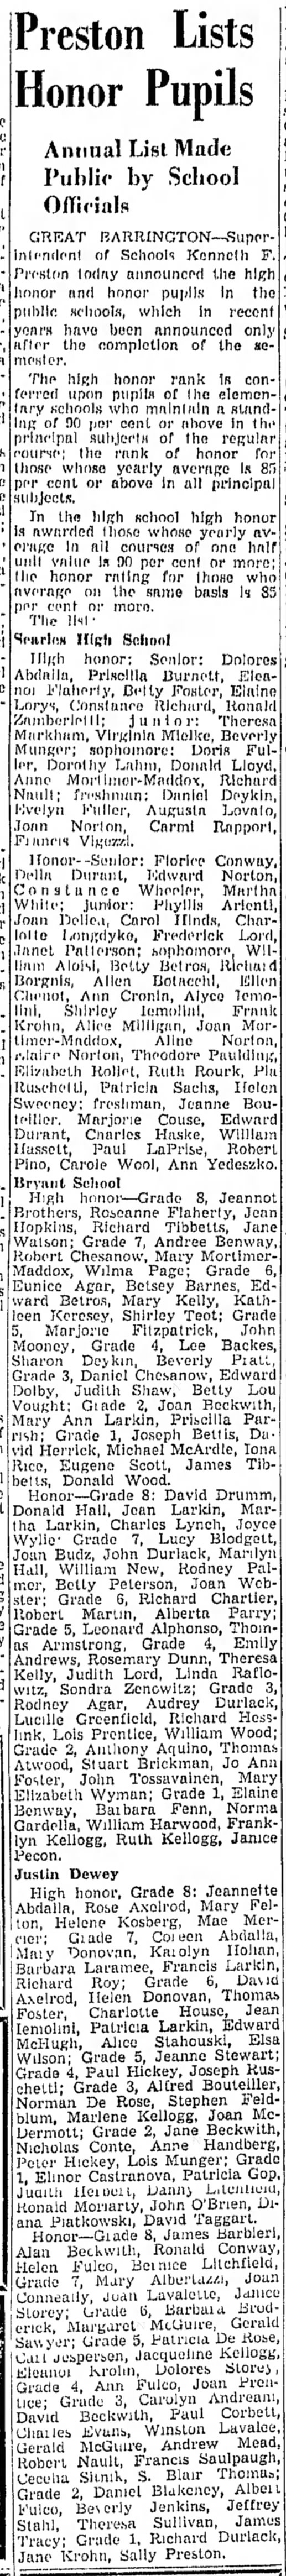 dad honor roll 3July1946